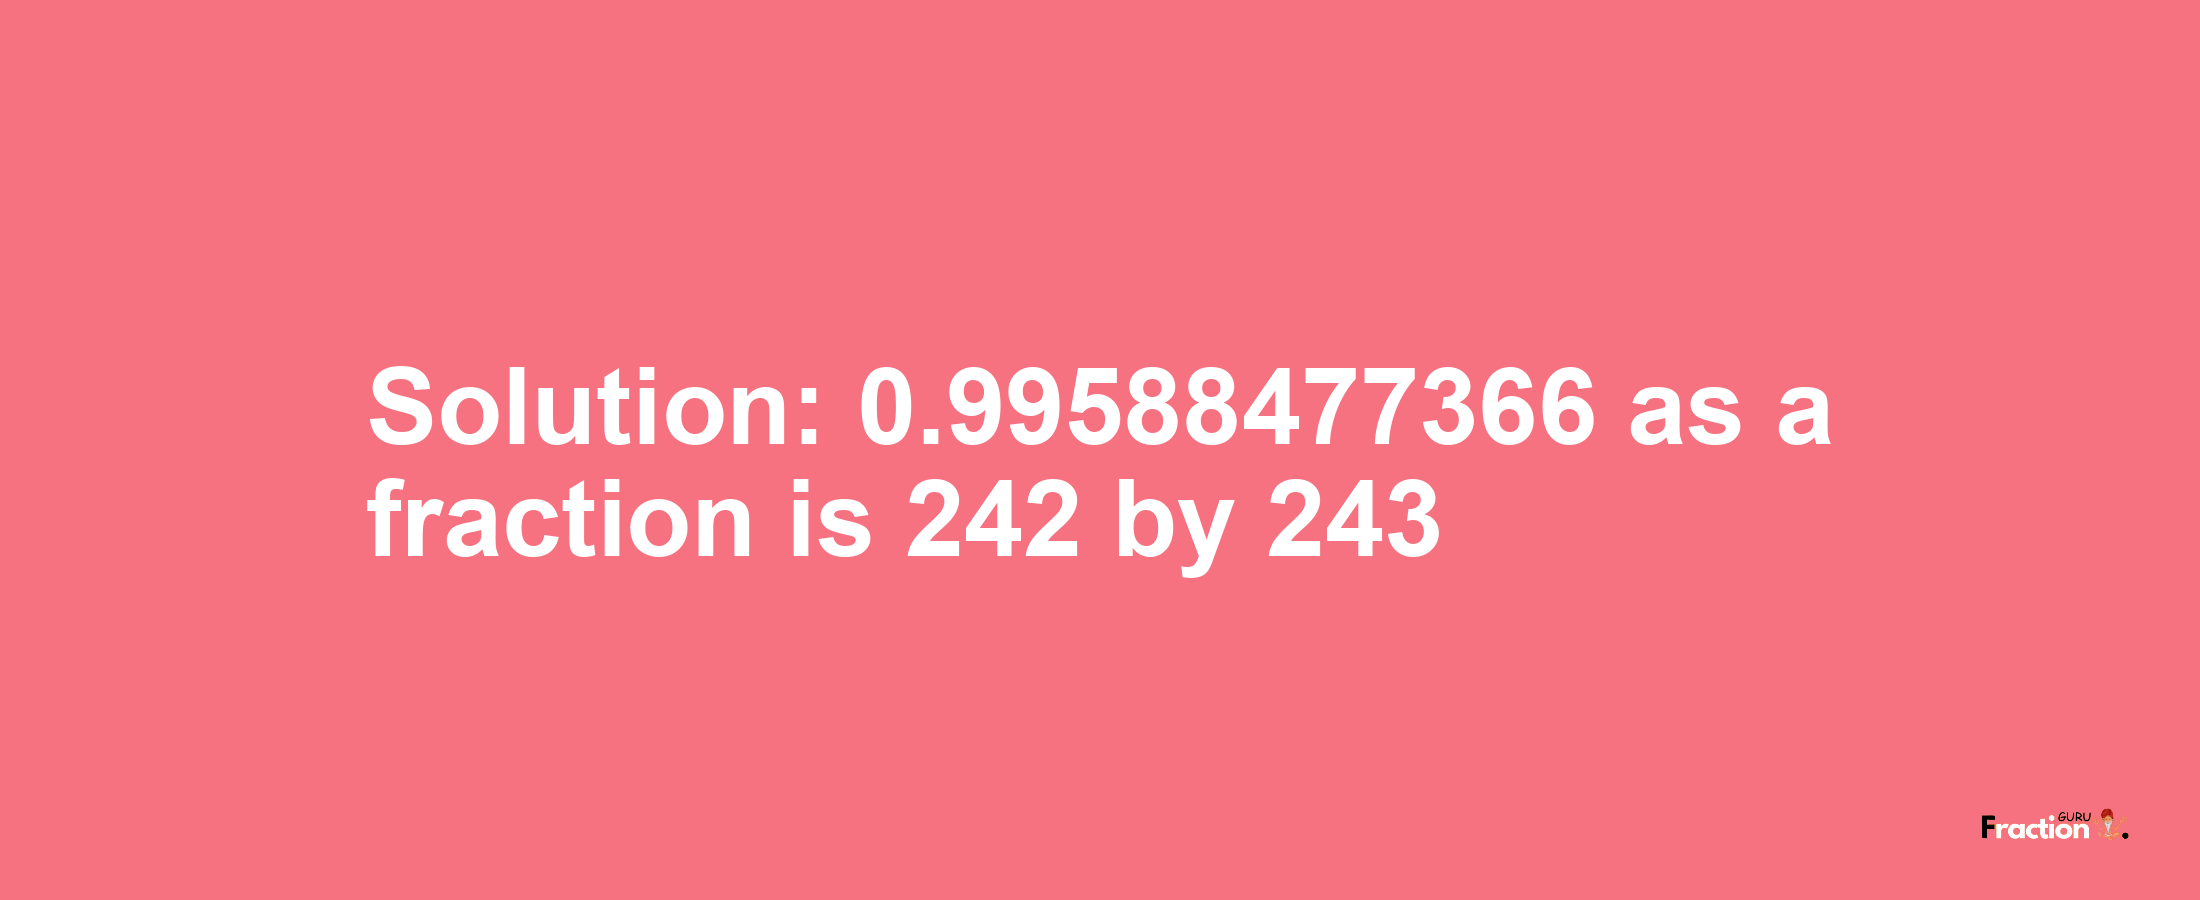 Solution:0.99588477366 as a fraction is 242/243